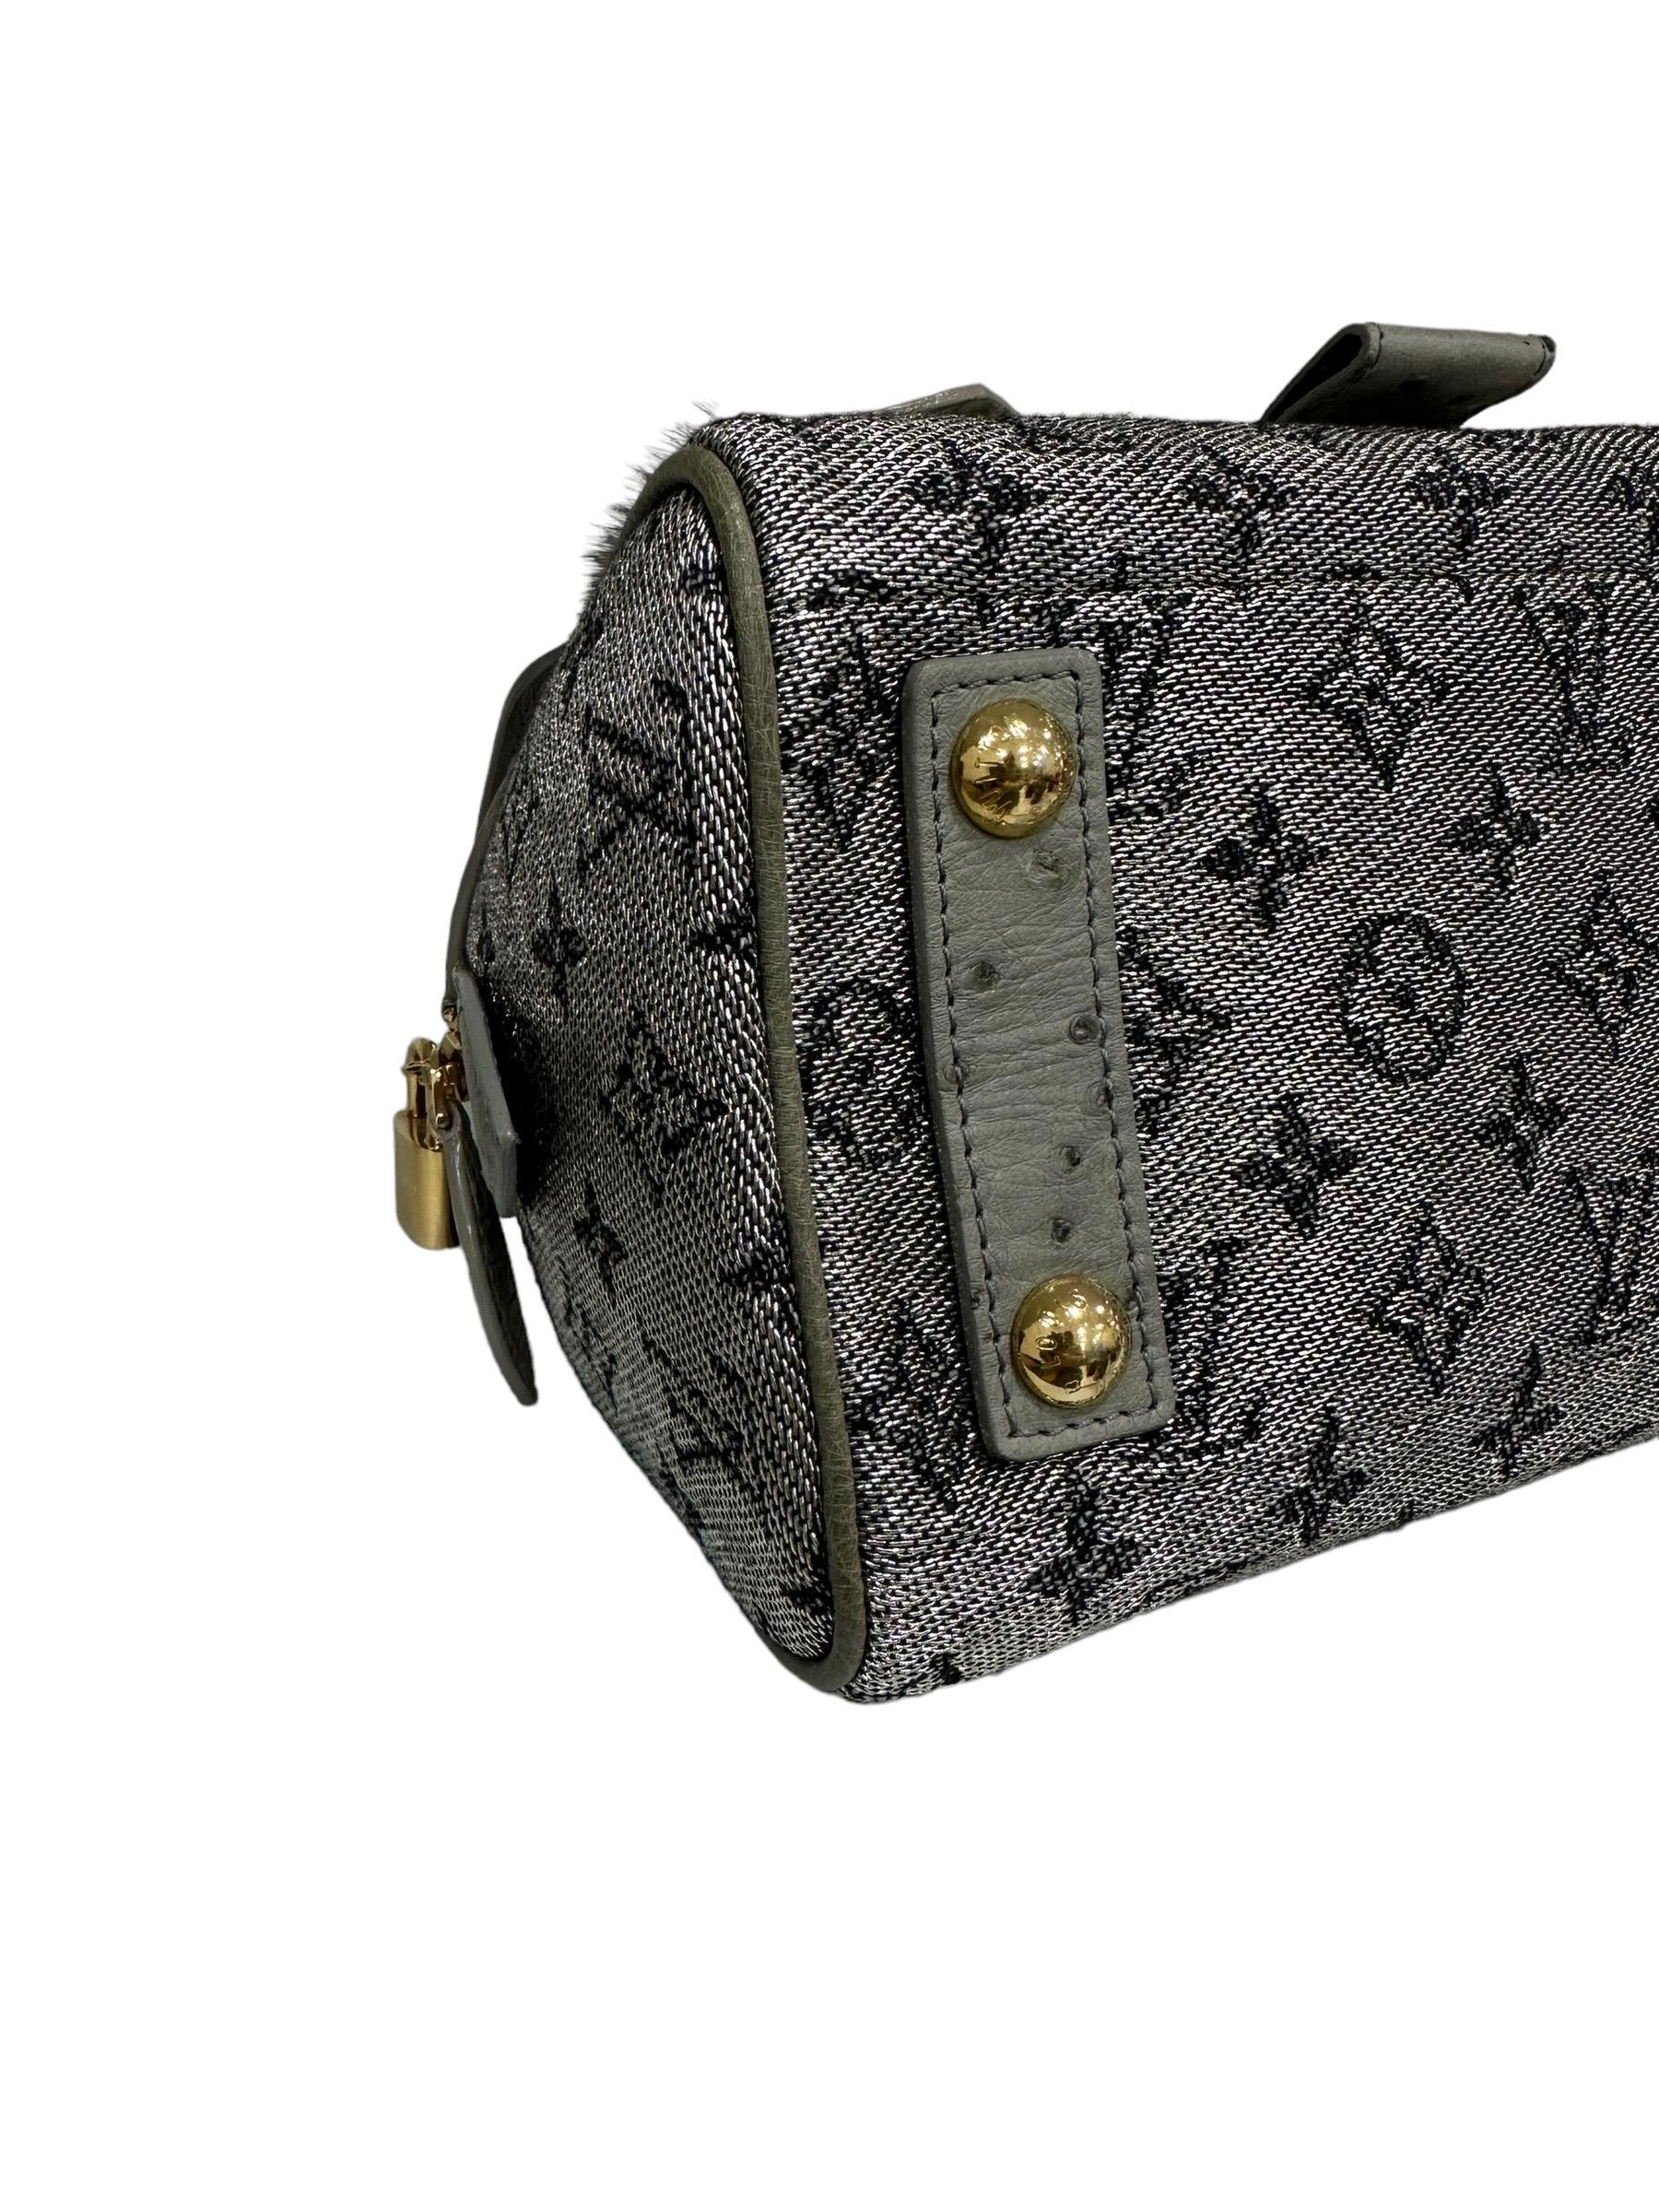 Iconic Louis Vuitton bag, Comédie Carousel model, year of production 2010/2011, made in lurex fabric with inserts in leathers with gold hardware. Equipped with zip closure and front flap in silver leather with interlocking hook. Equipped with a